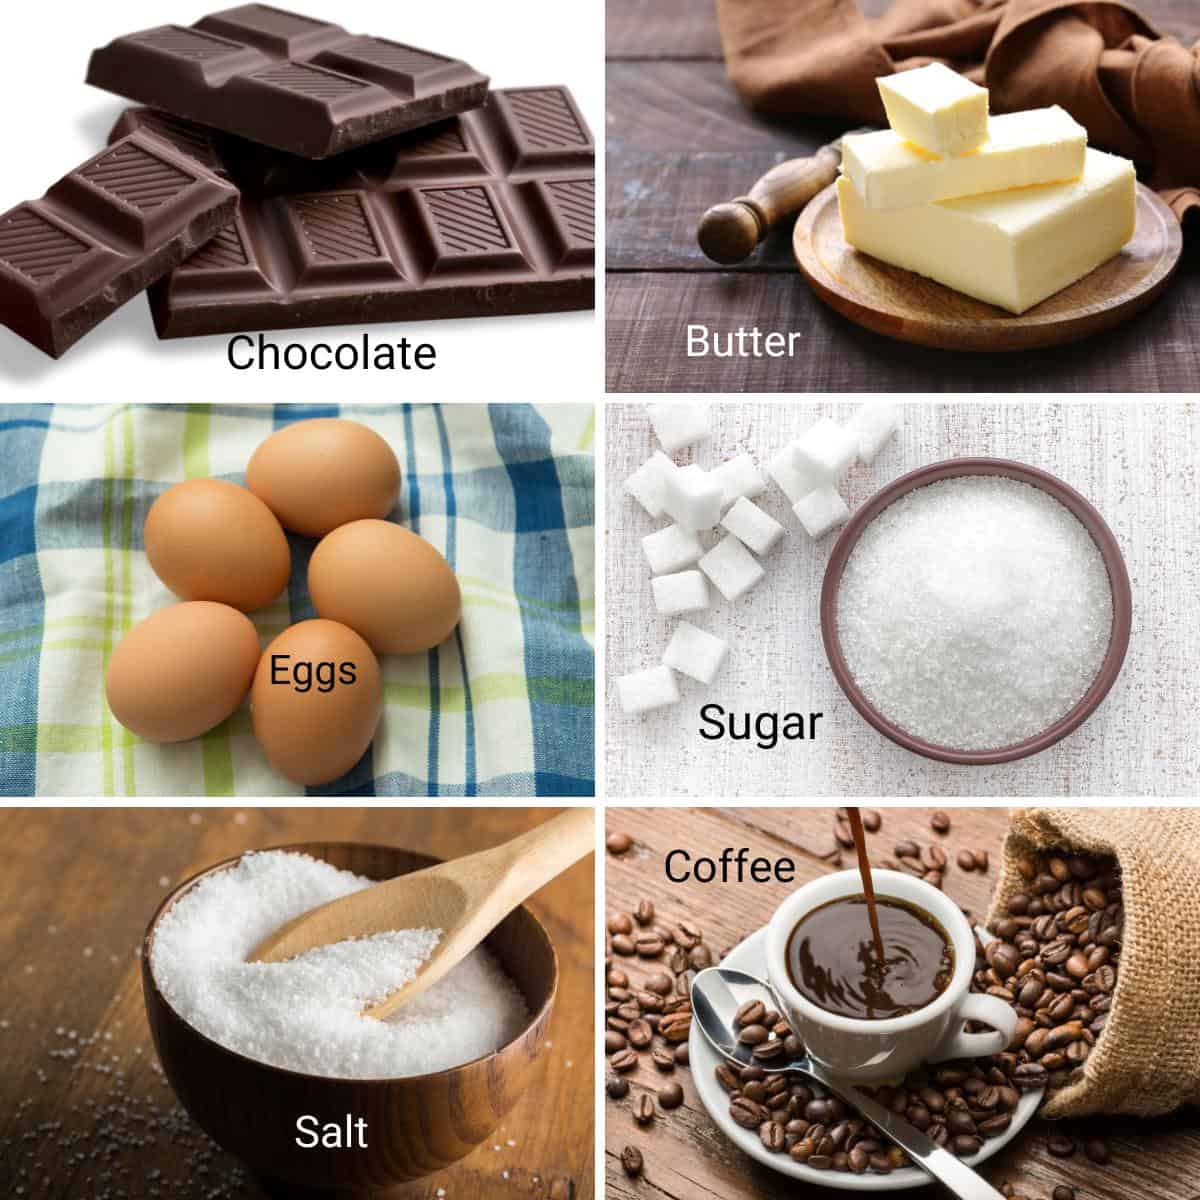 Ingredients for making chocolate torte.